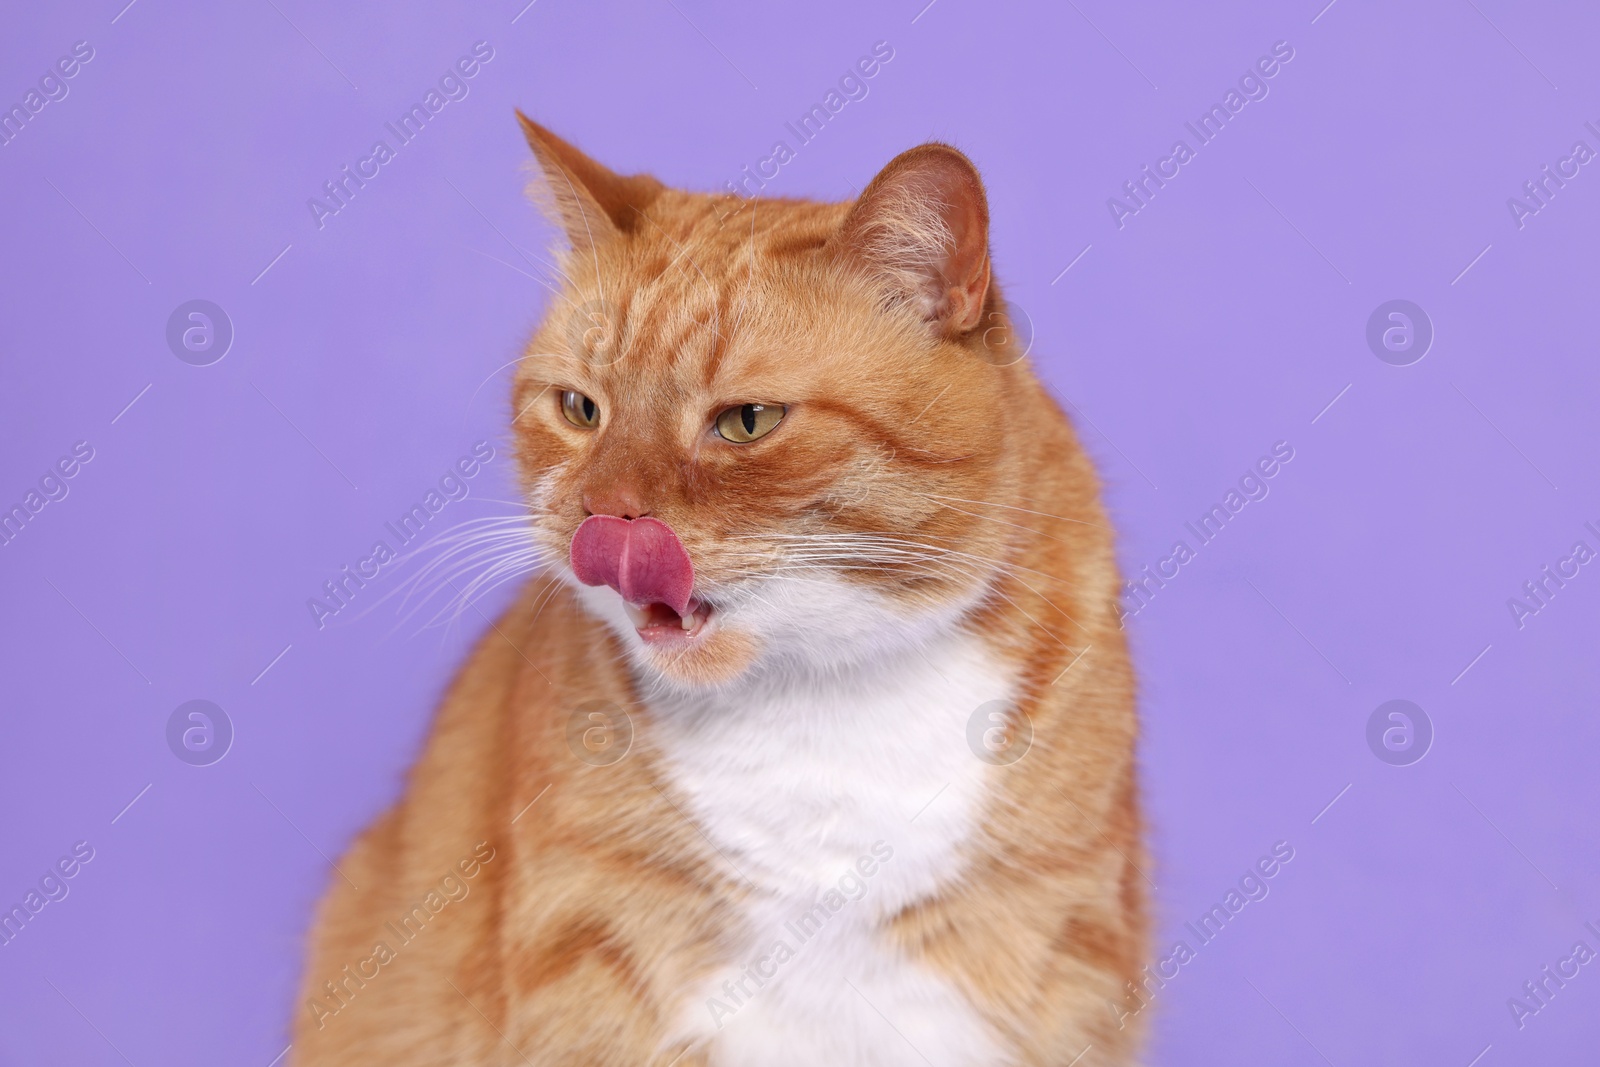 Photo of Cute cat licking itself on lilac background